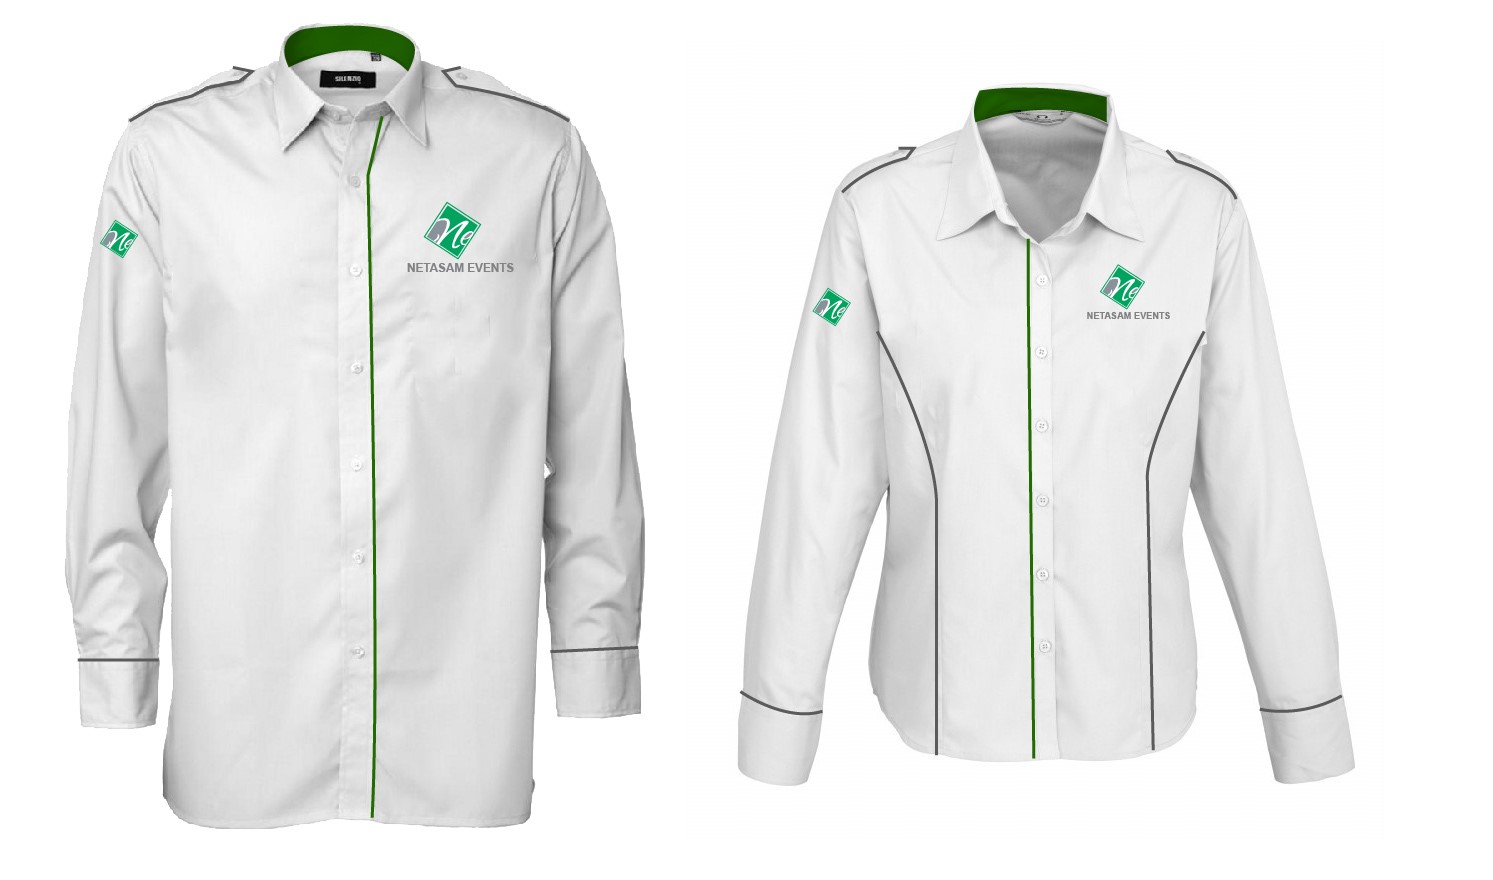 BH Clothing, Corporate Clothing, Uniforms